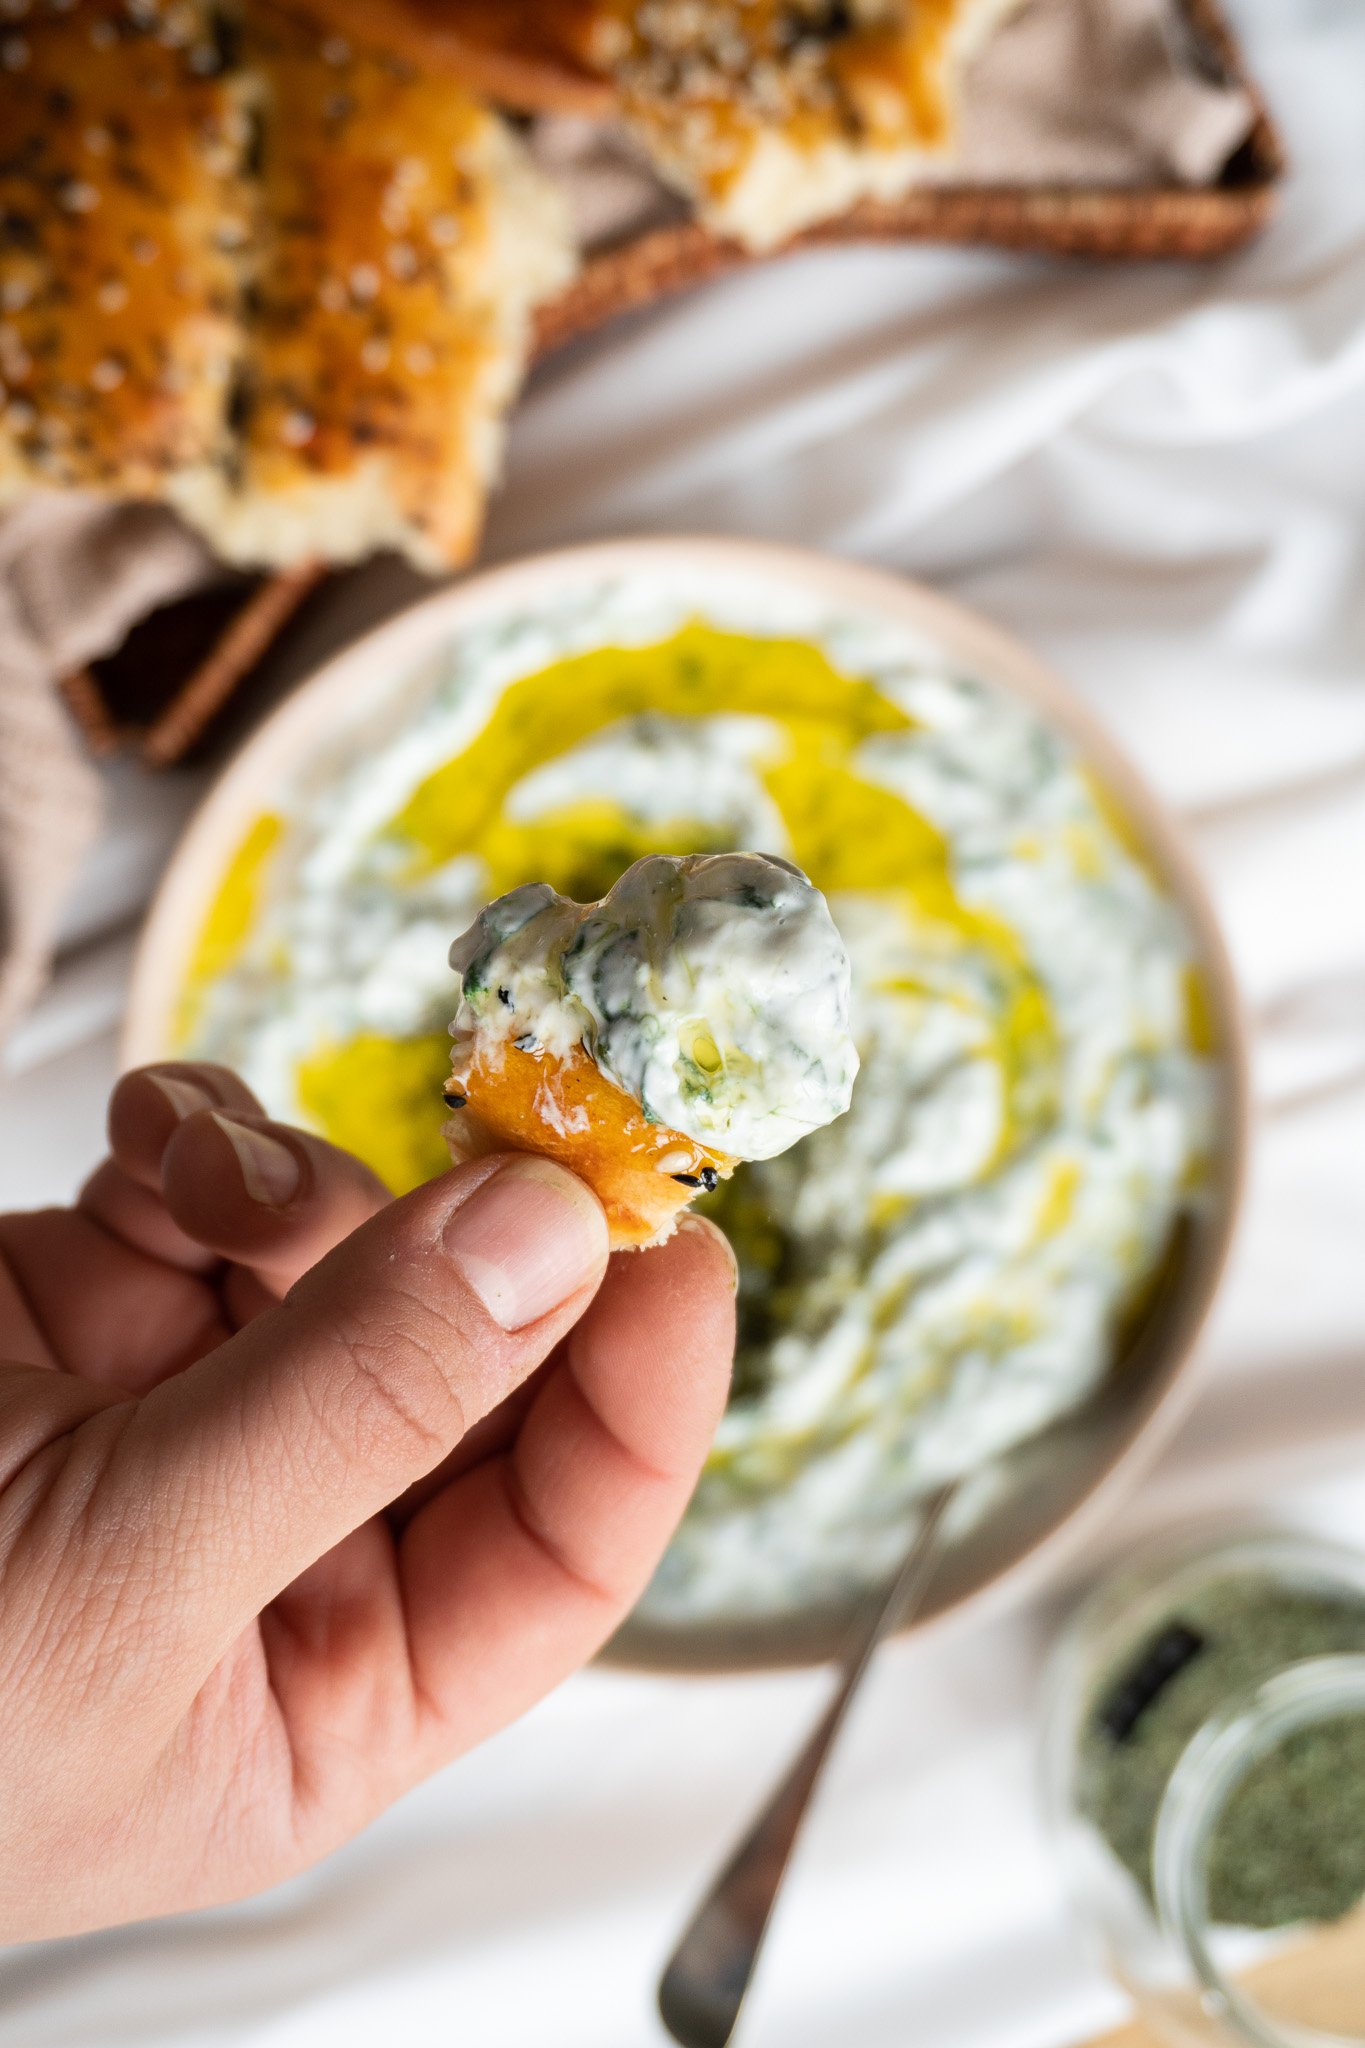 A close-up of Borani Esfenaj, a creamy and refreshing yogurt dip that is popular in Iranian cuisine. The dip is made with spinach, garlic, and is garnished with dried mint leaves.